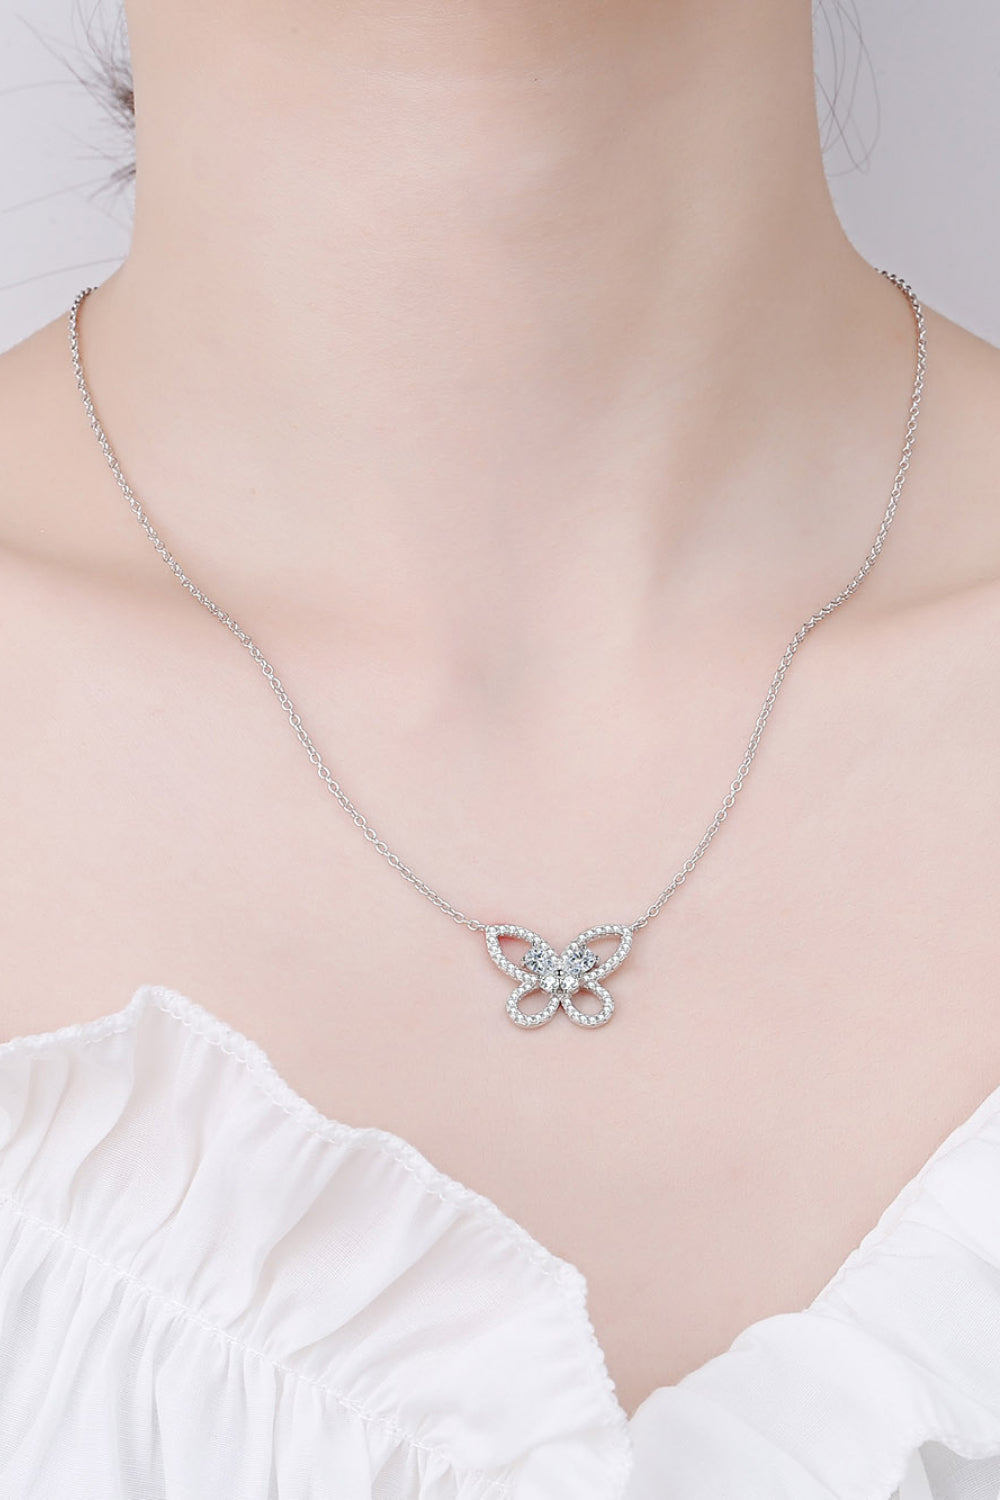 Moissanite Butterfly Pendant Necklace